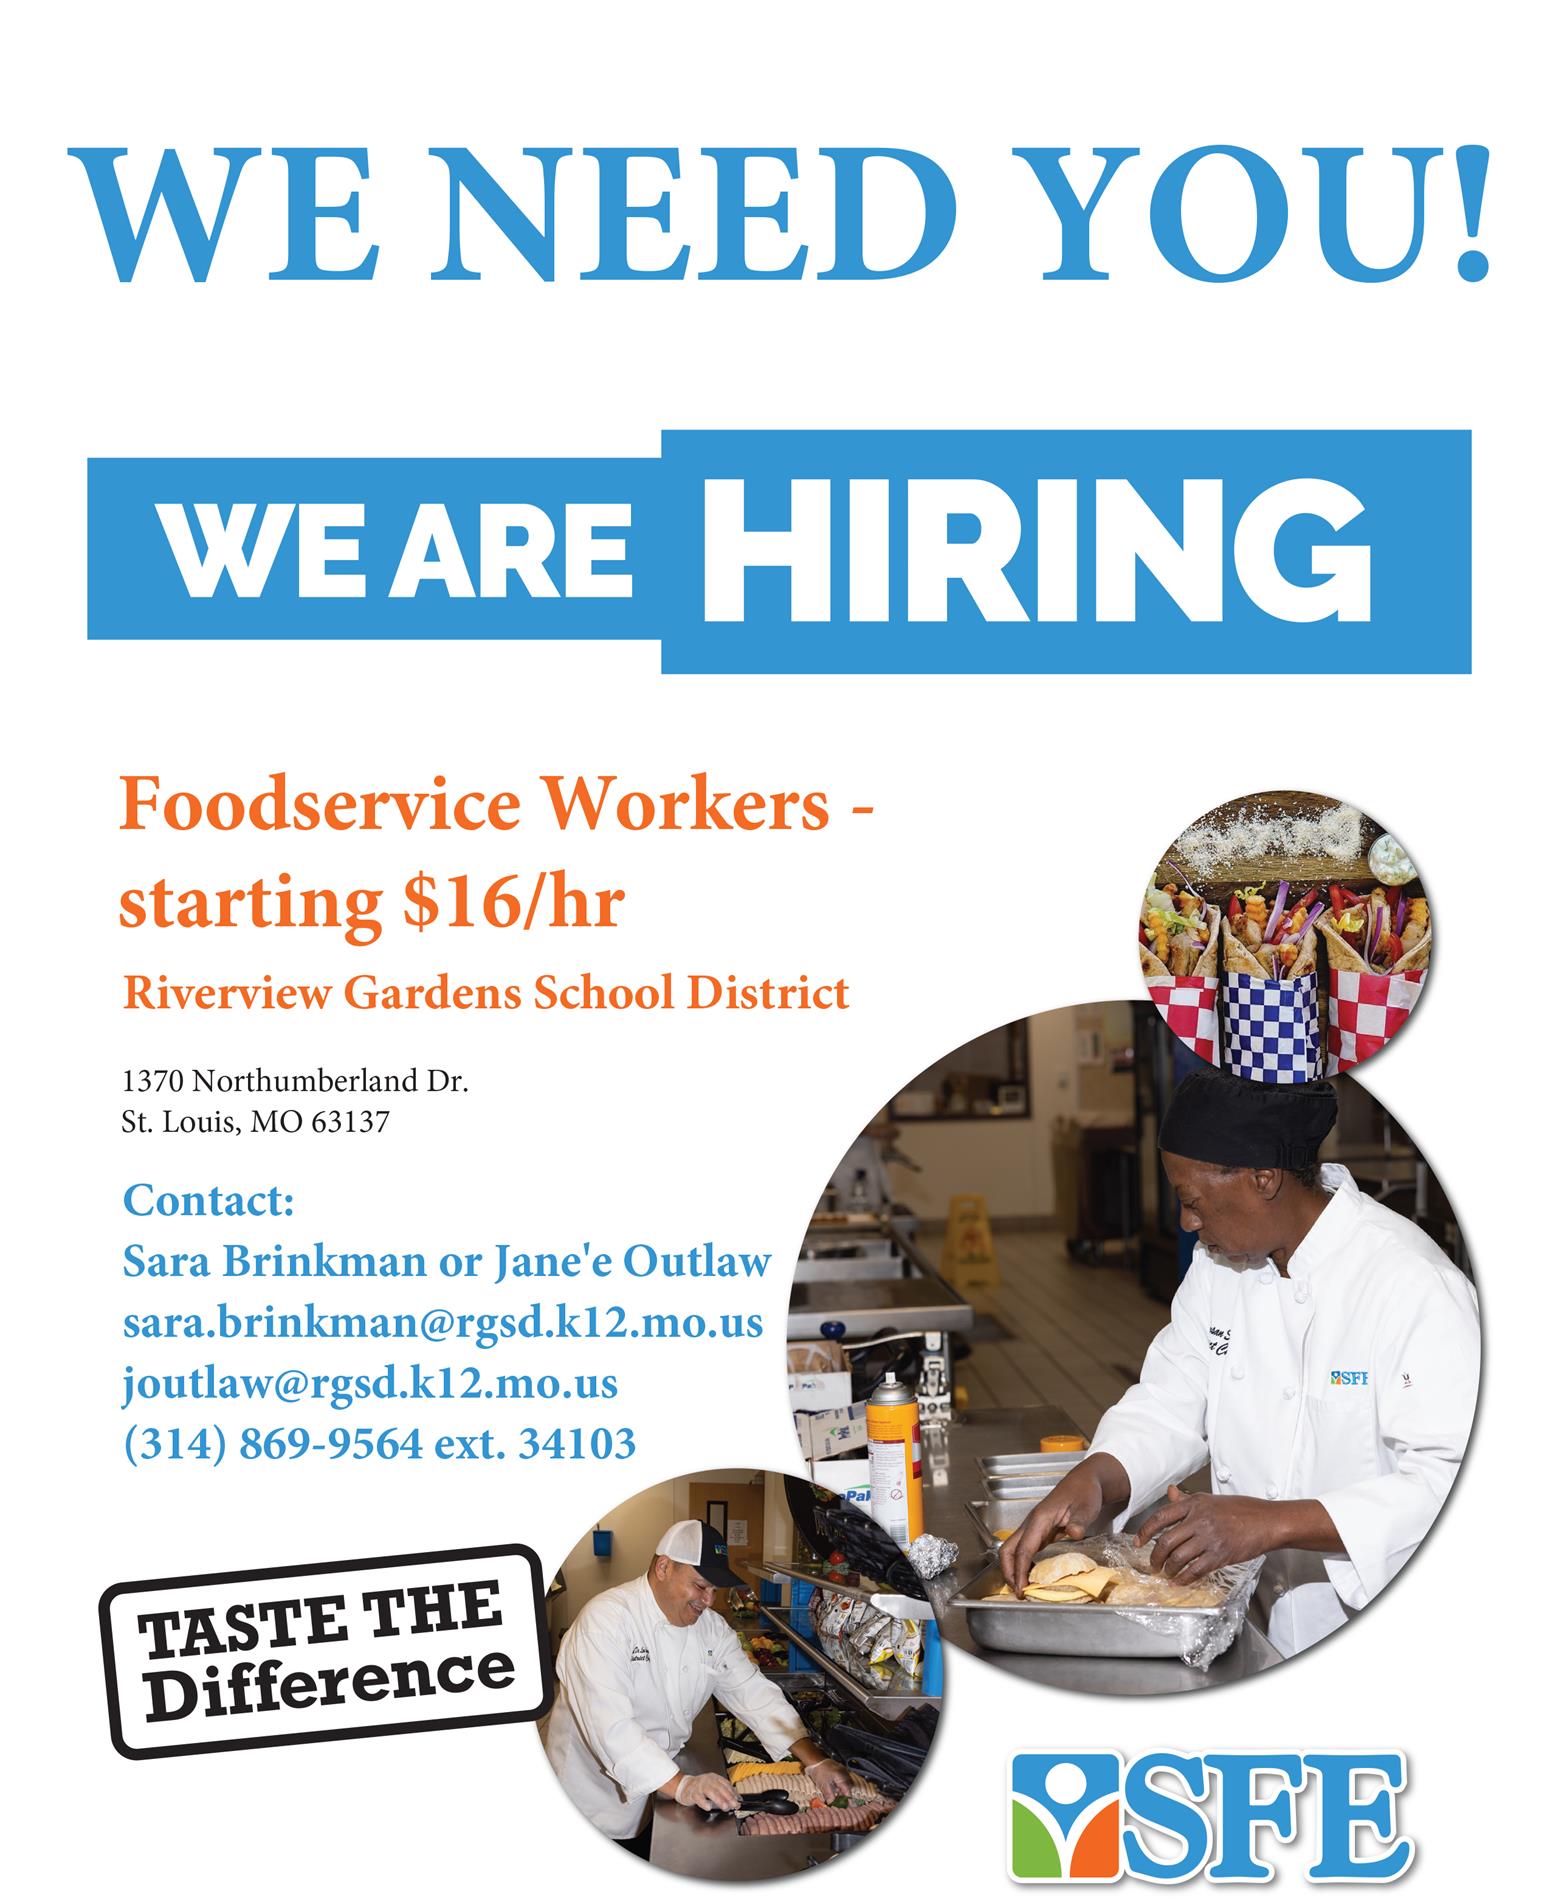 SFE is hiring foodservice workers